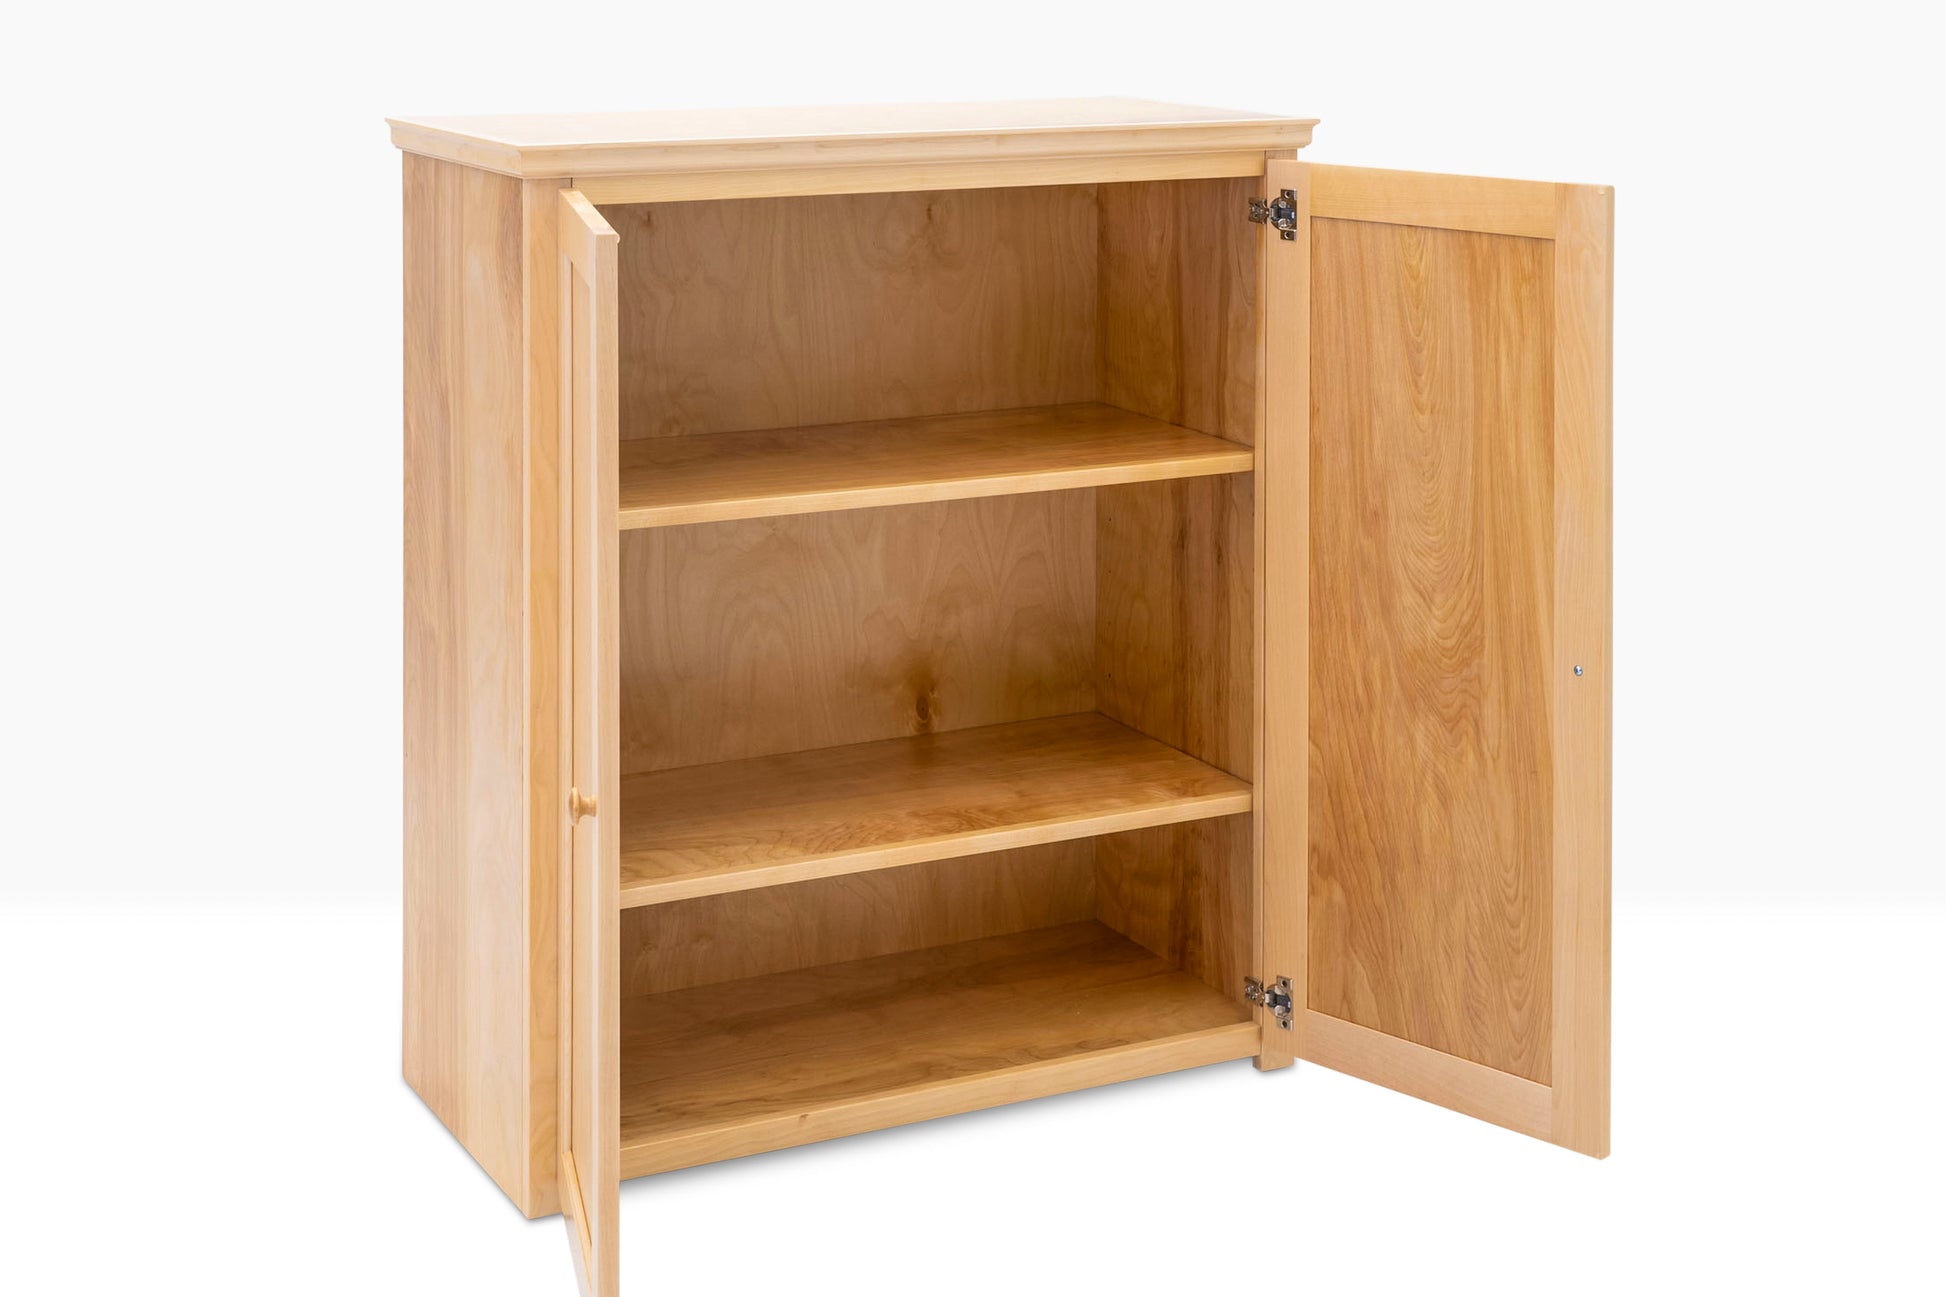 Berkshire Plymouth Cabinet Shown in unfinished birch with doors open to highlight adjustable shelving.